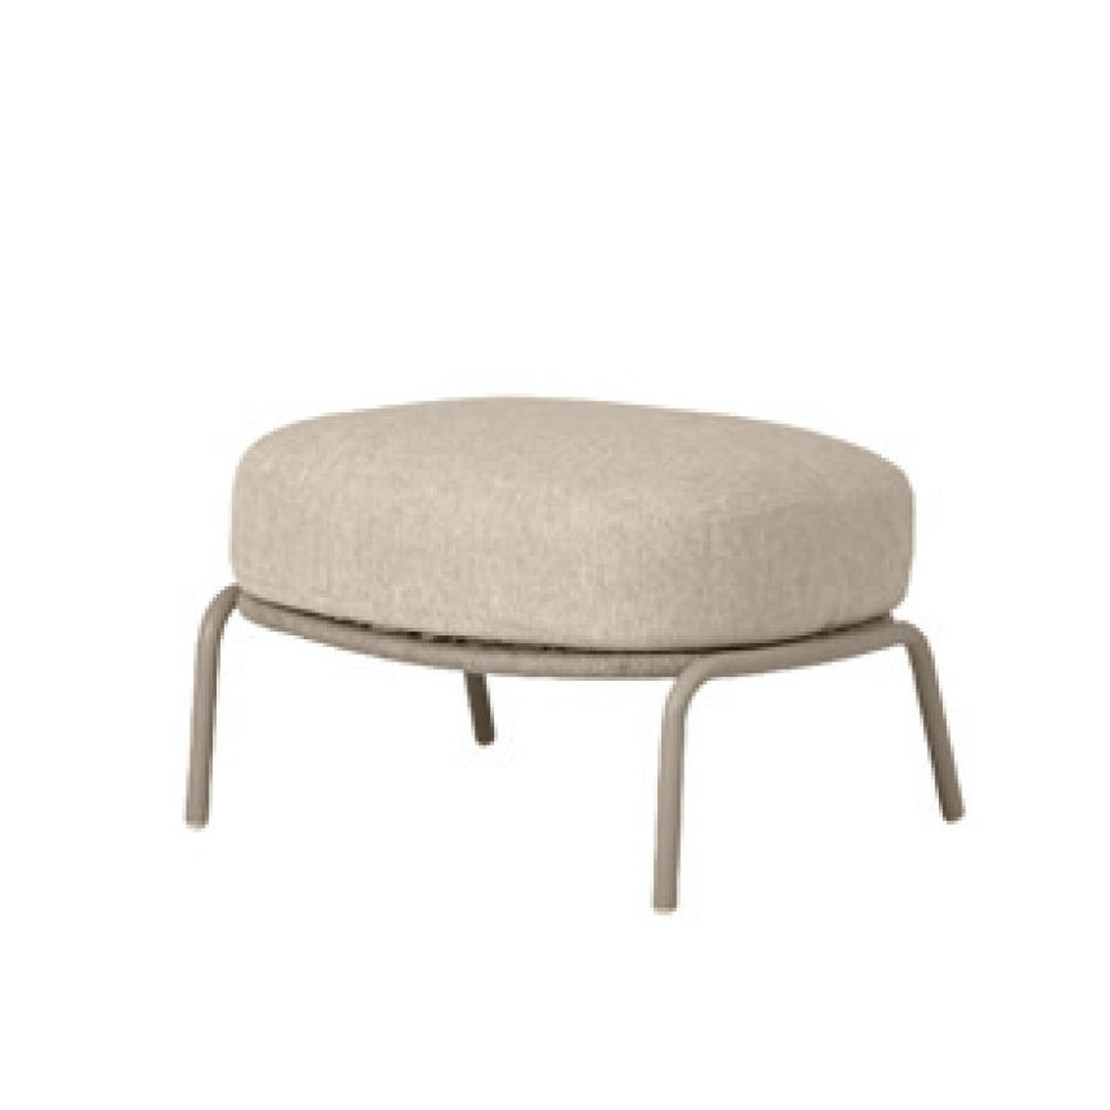 Puccini footstool latte with cushion